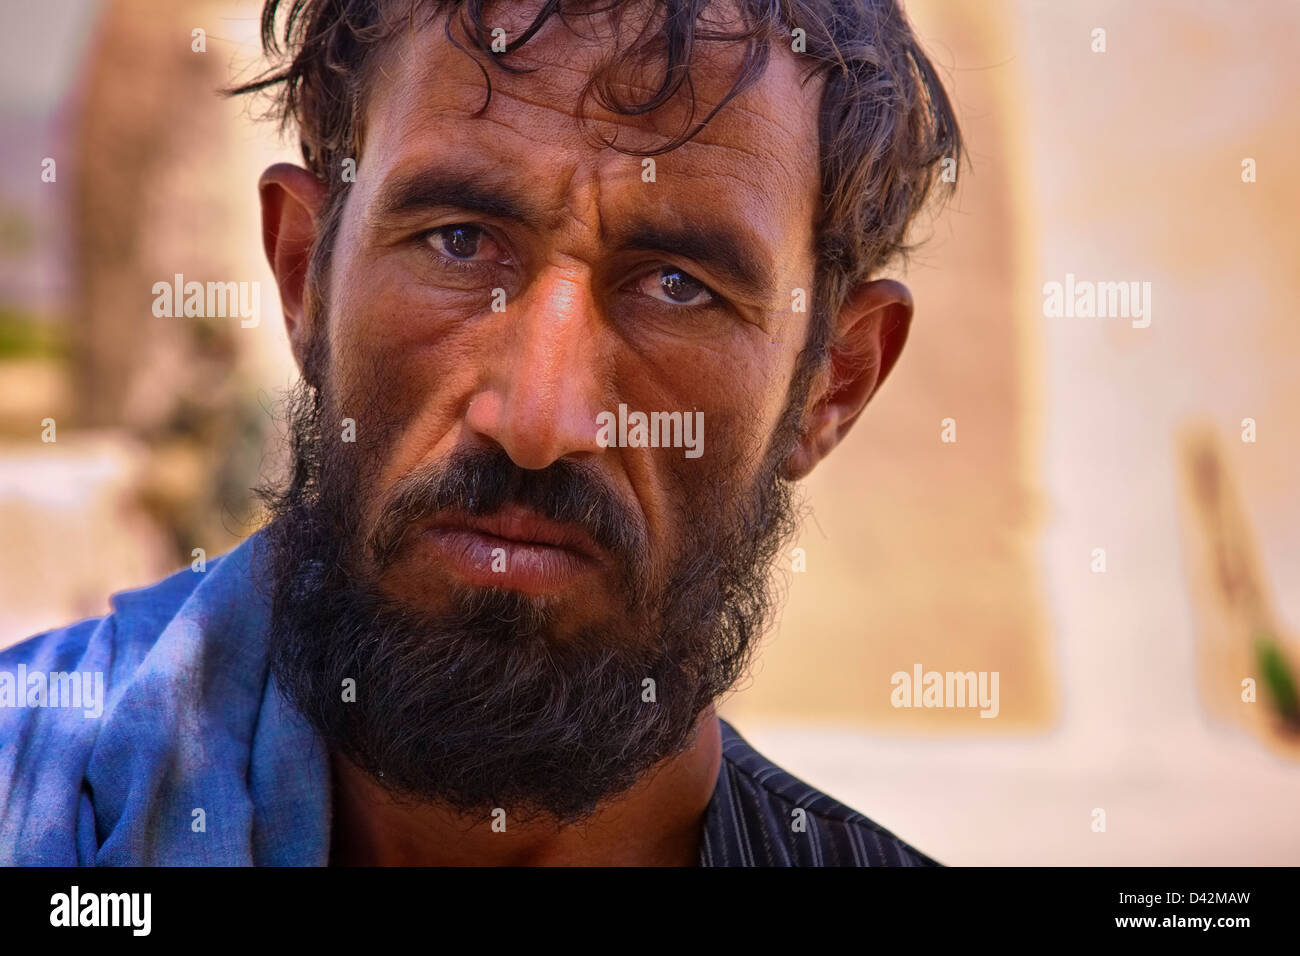 Kandahar, Afghanistan - June 22, 2010: The face of an Afghan man shows the years of strain endured by his country. Stock Photo